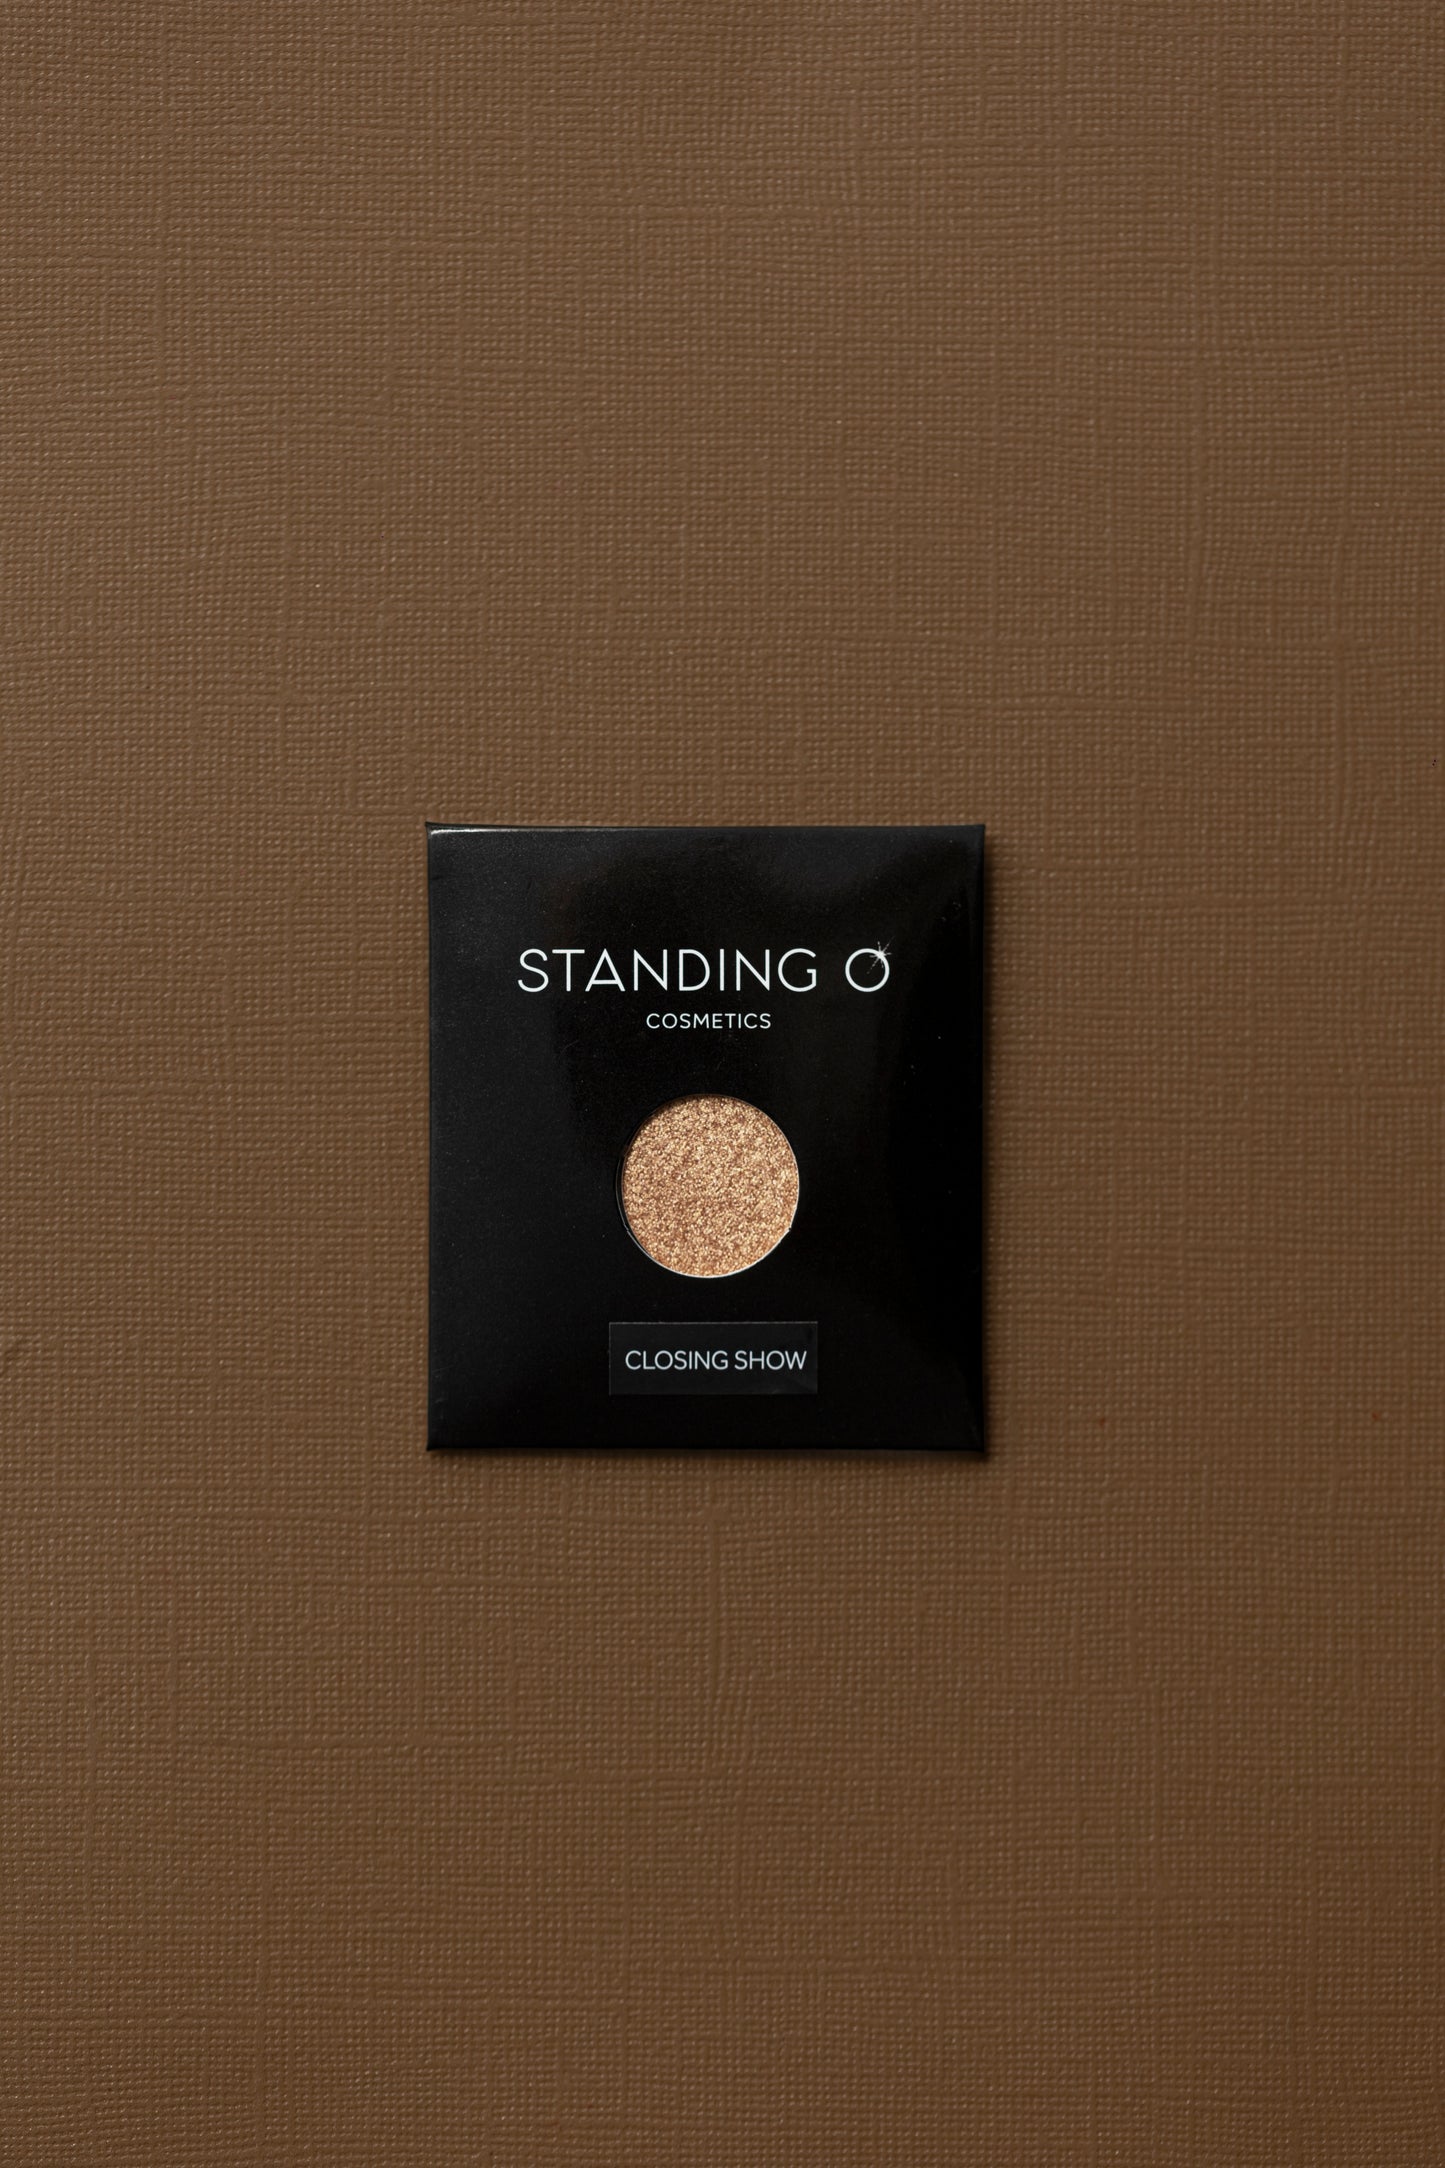 'Standing O' single eyeshadow in shade 'Closing Show', a captivating bronze simmer shade with a velvety texture.